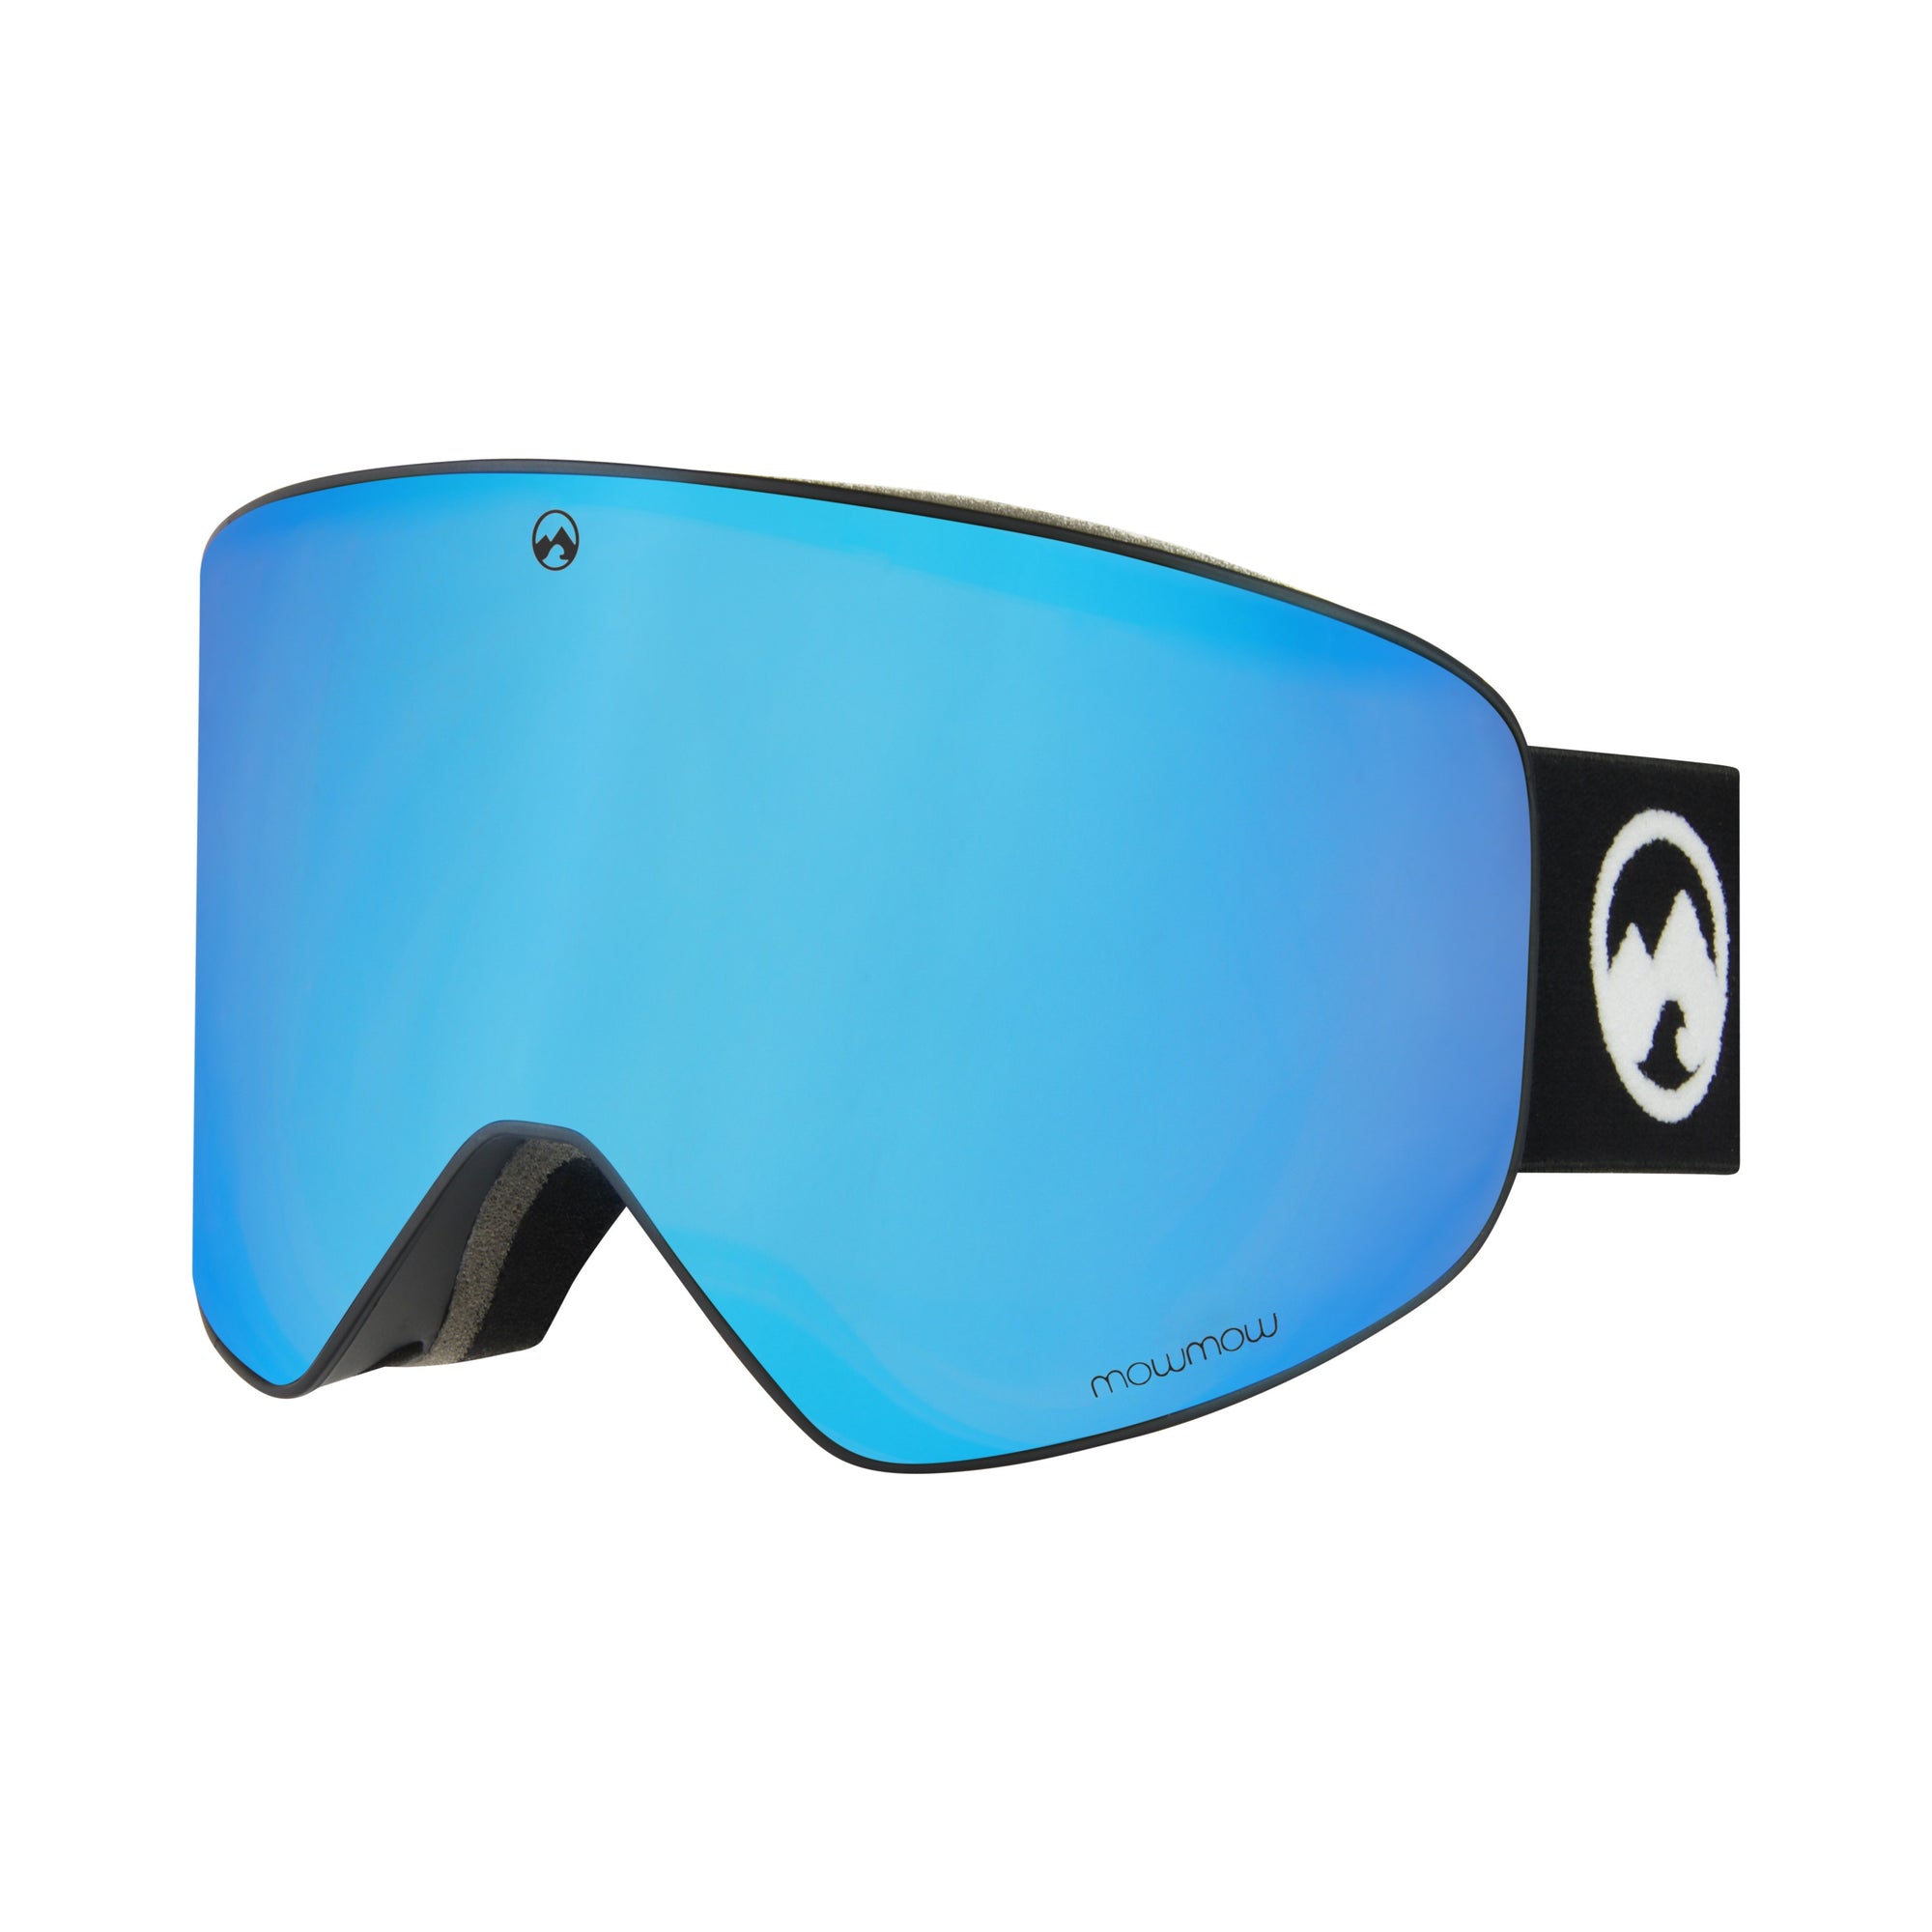 Stealth - M/L black Frame / Ice Blue photochromic LuxaLens - mowmow